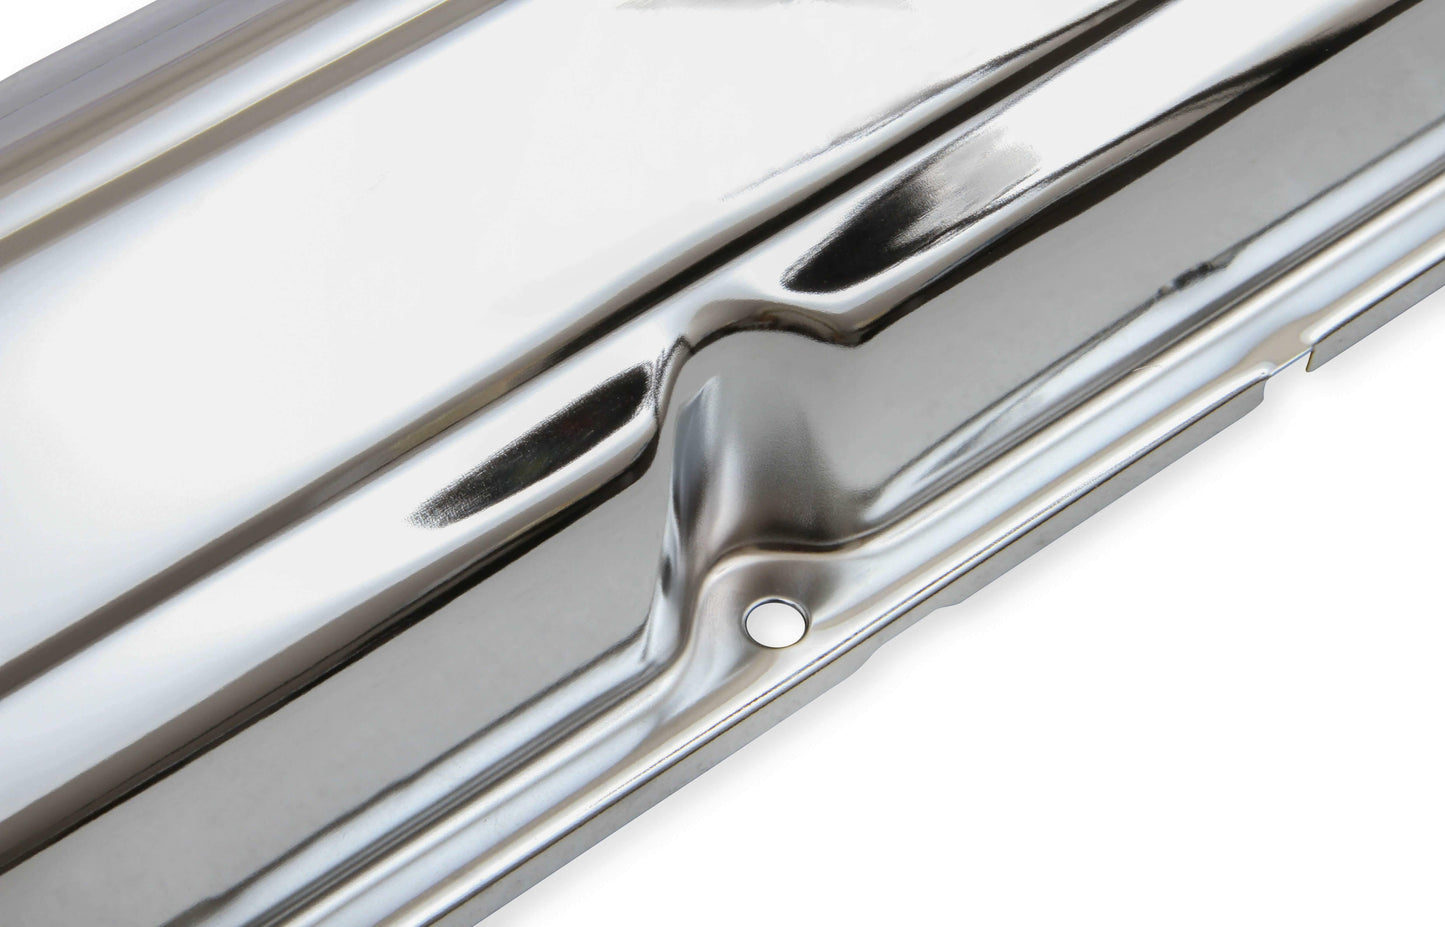 Mr. Gasket Chrome Valve Covers with Baffle - 9413